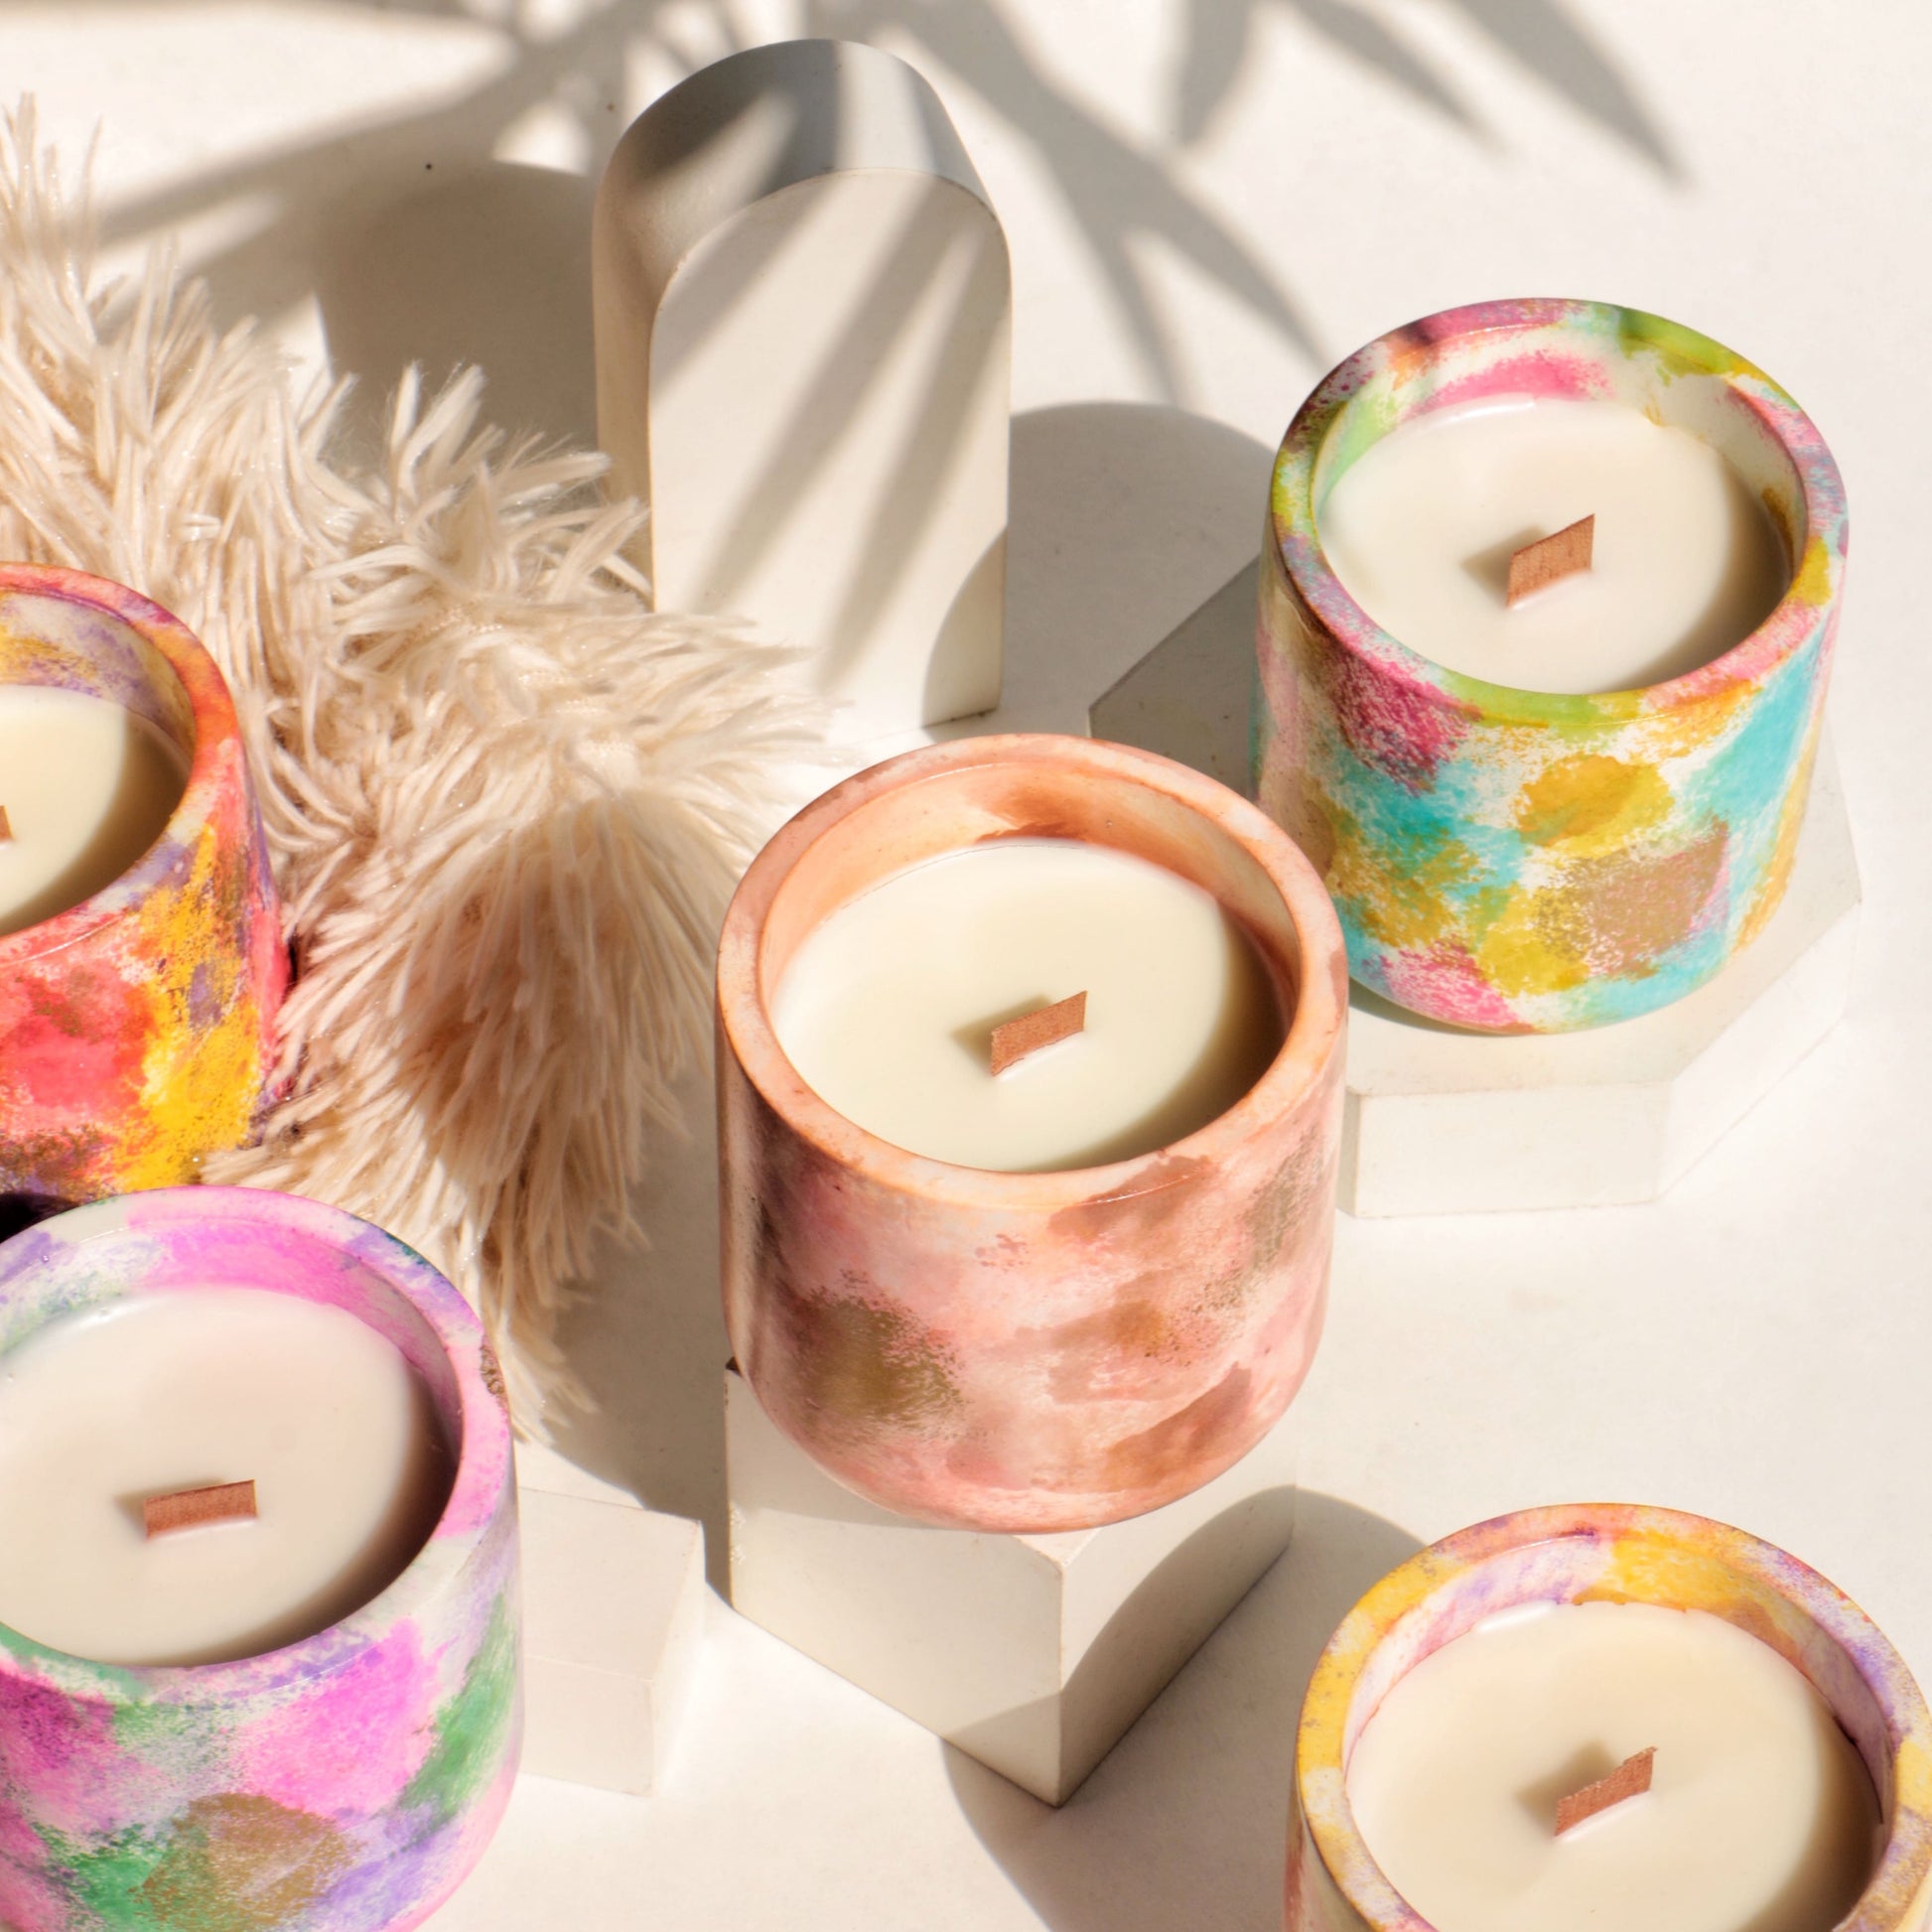 Fragrant candle filling the room with a warm, inviting scent